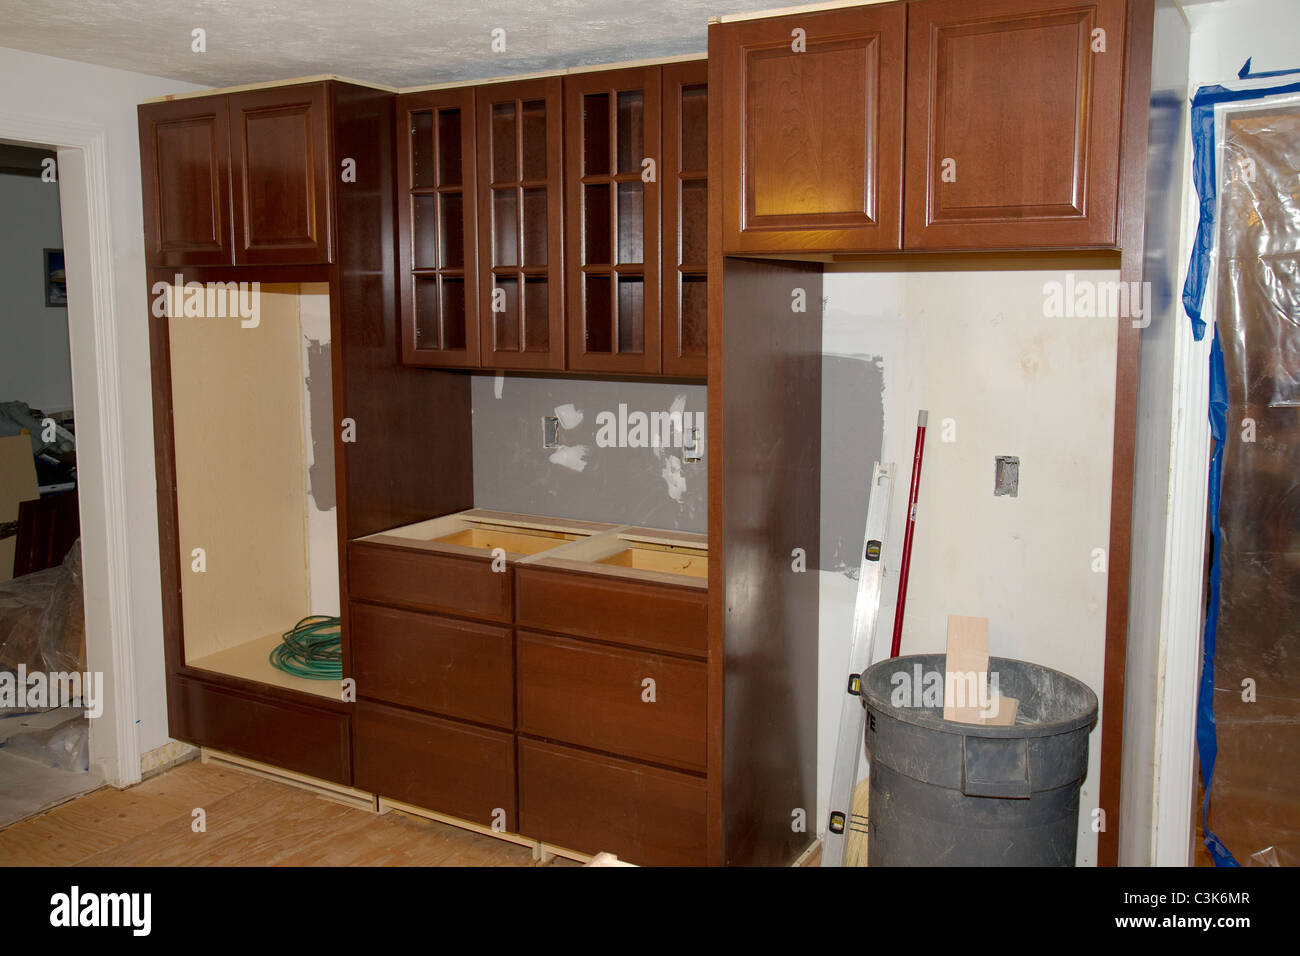 1960 S Style American Home Kitchen During Remodeling New Cherry